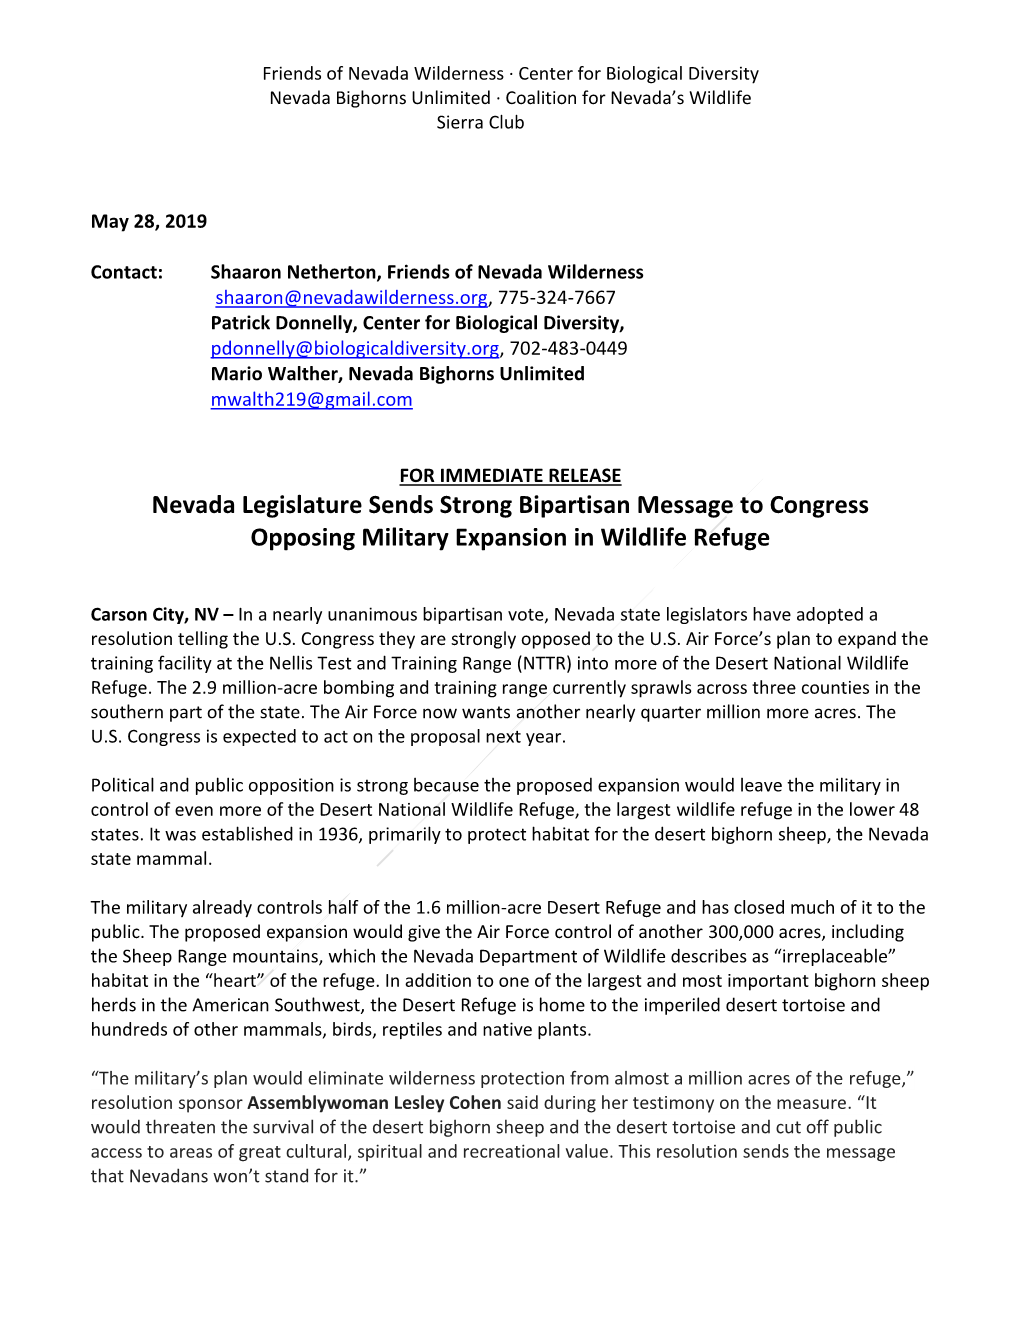 Nevada Legislature Sends Strong Bipartisan Message to Congress Opposing Military Expansion in Wildlife Refuge